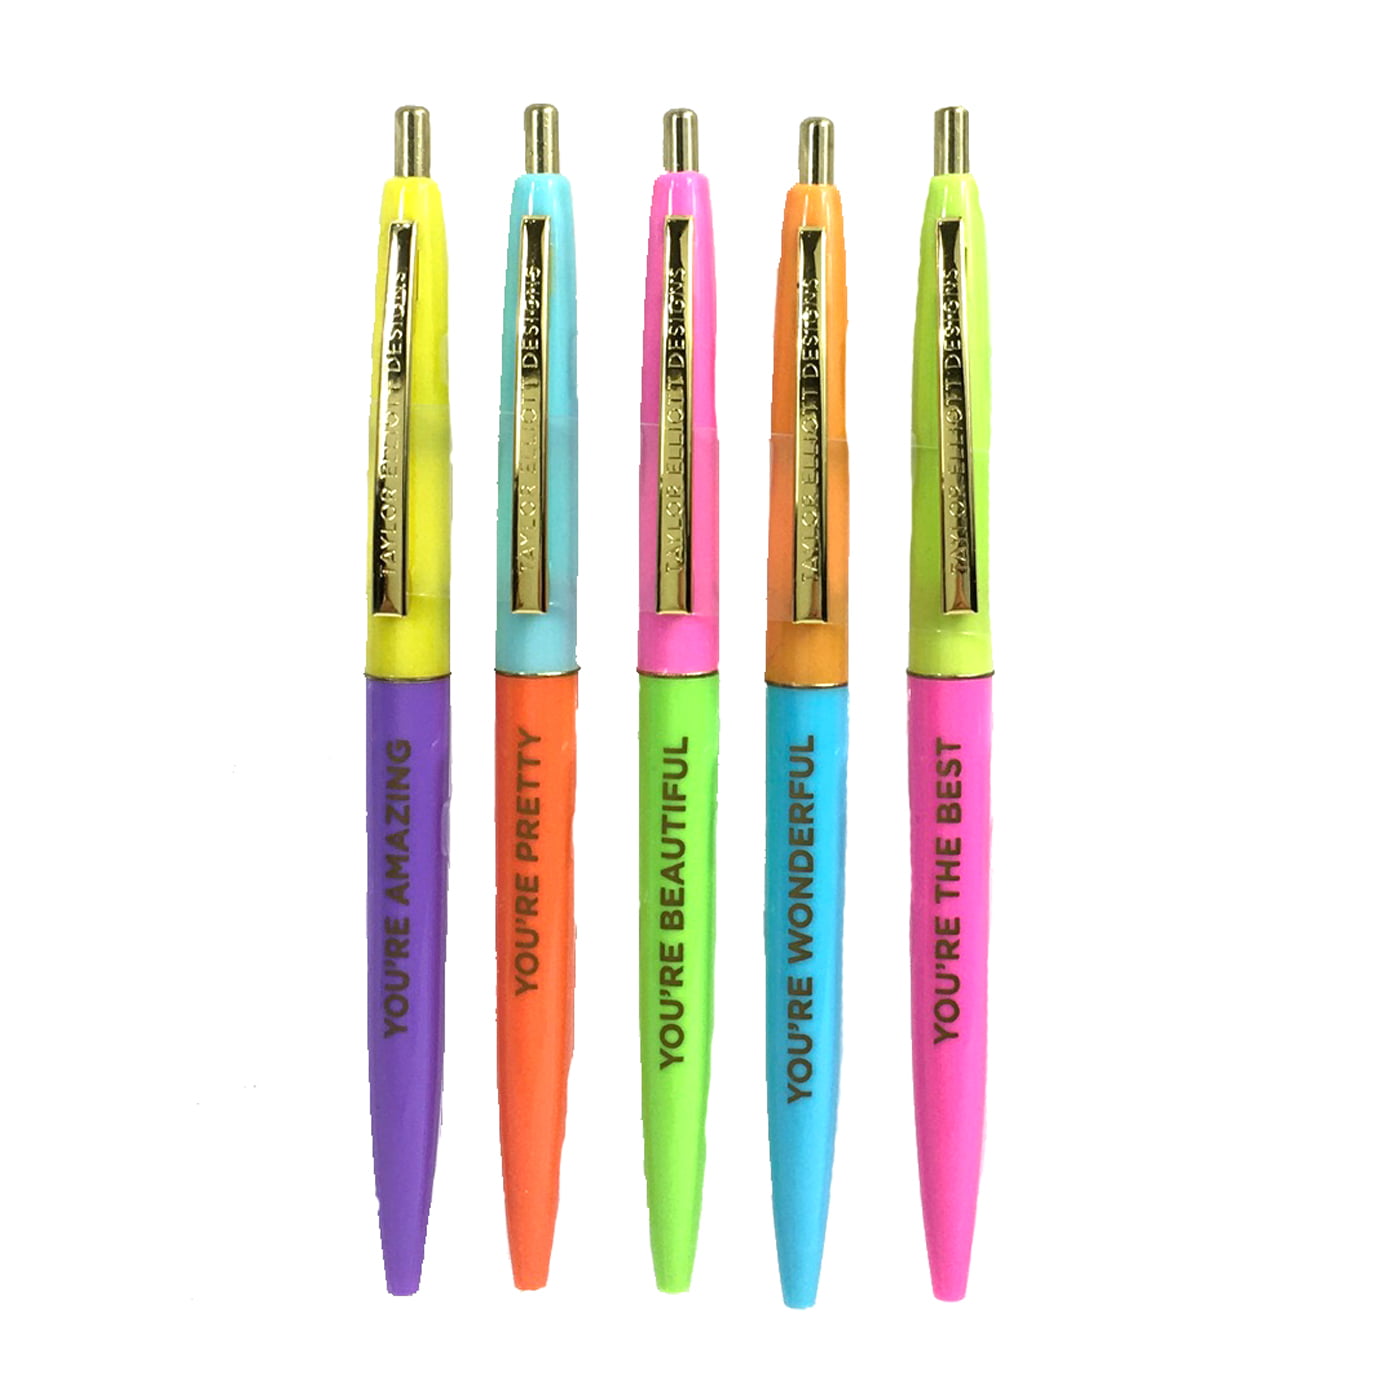 Sample Pack From India Flair Four Color Ballpoint 1 Pen For Writing 